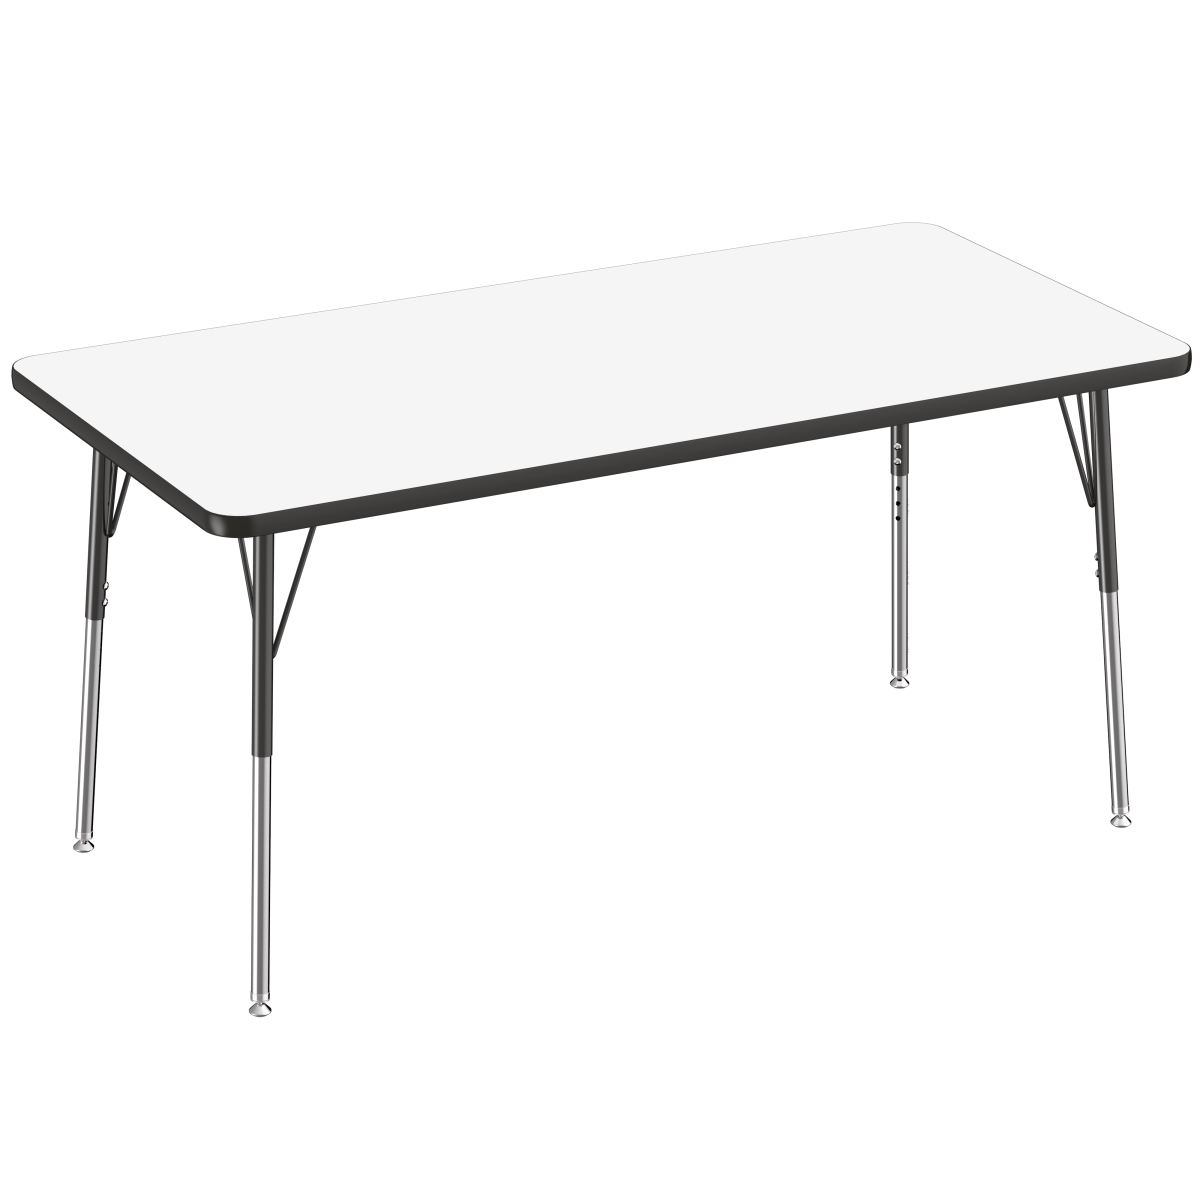 10176-debk 30 X 60 In. Rectangle Dry-erase Adjustable Activity Table With Standard Swivel - Black